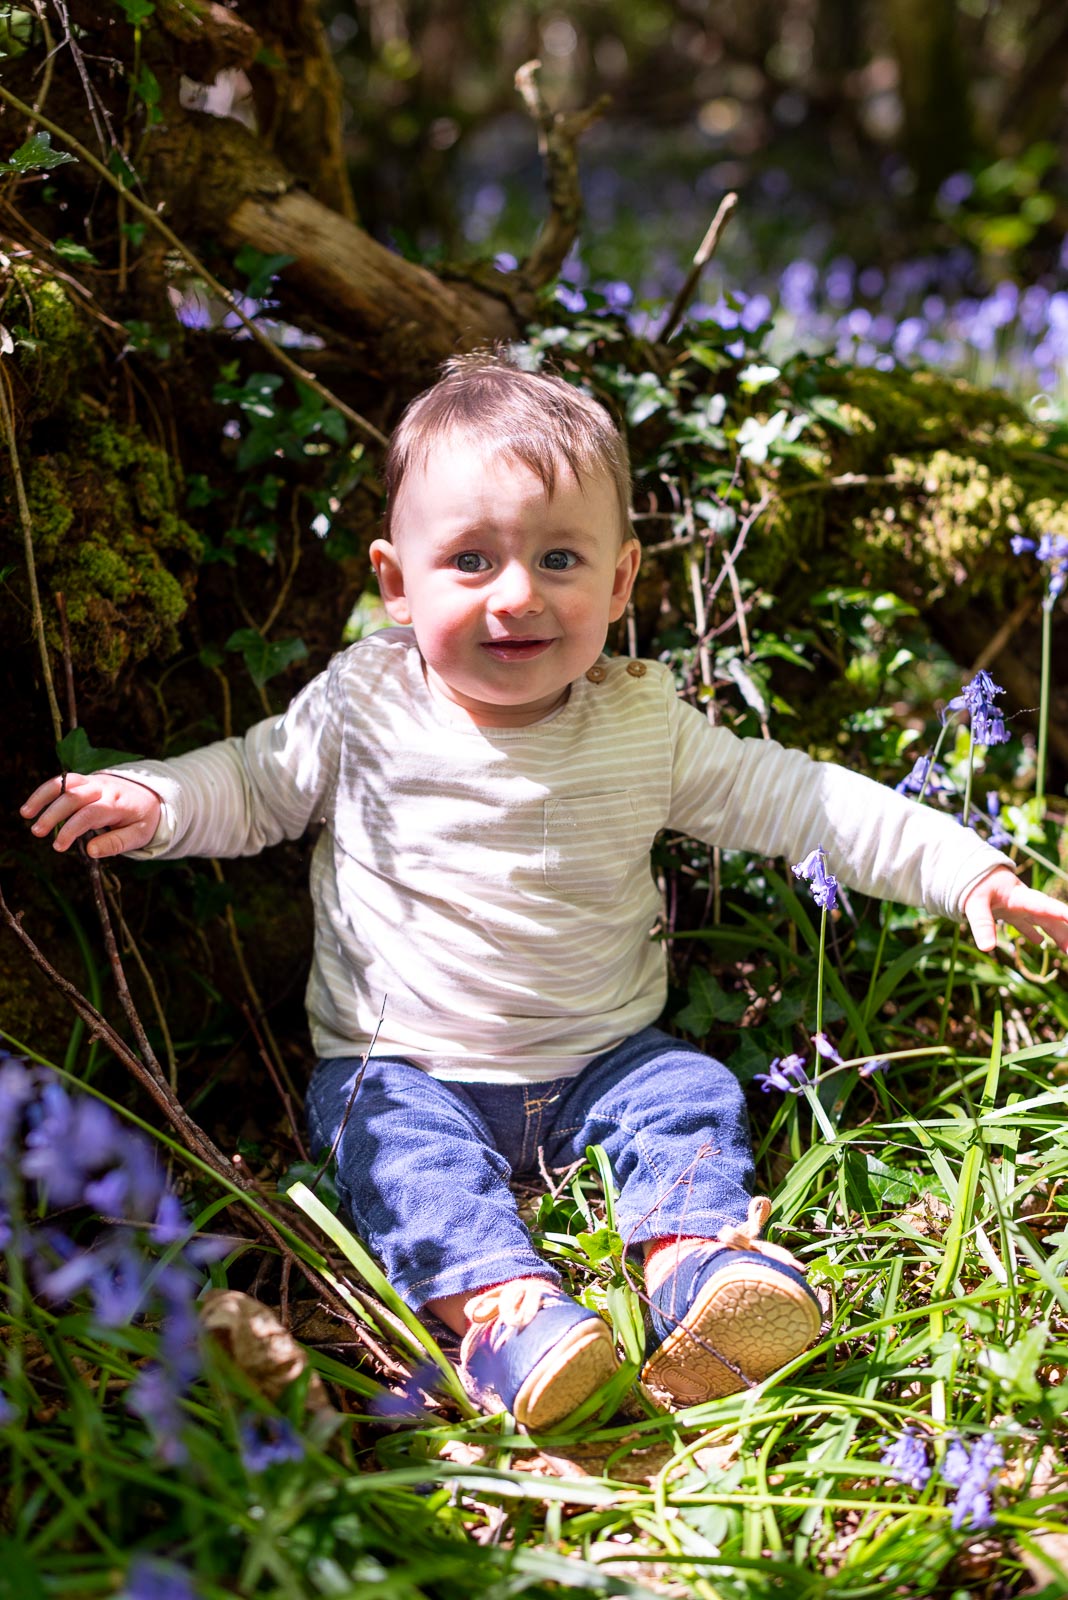 Eight month old baby Alasdair sits down and smiles at the camera among the bluebells at Battle Great Woods.